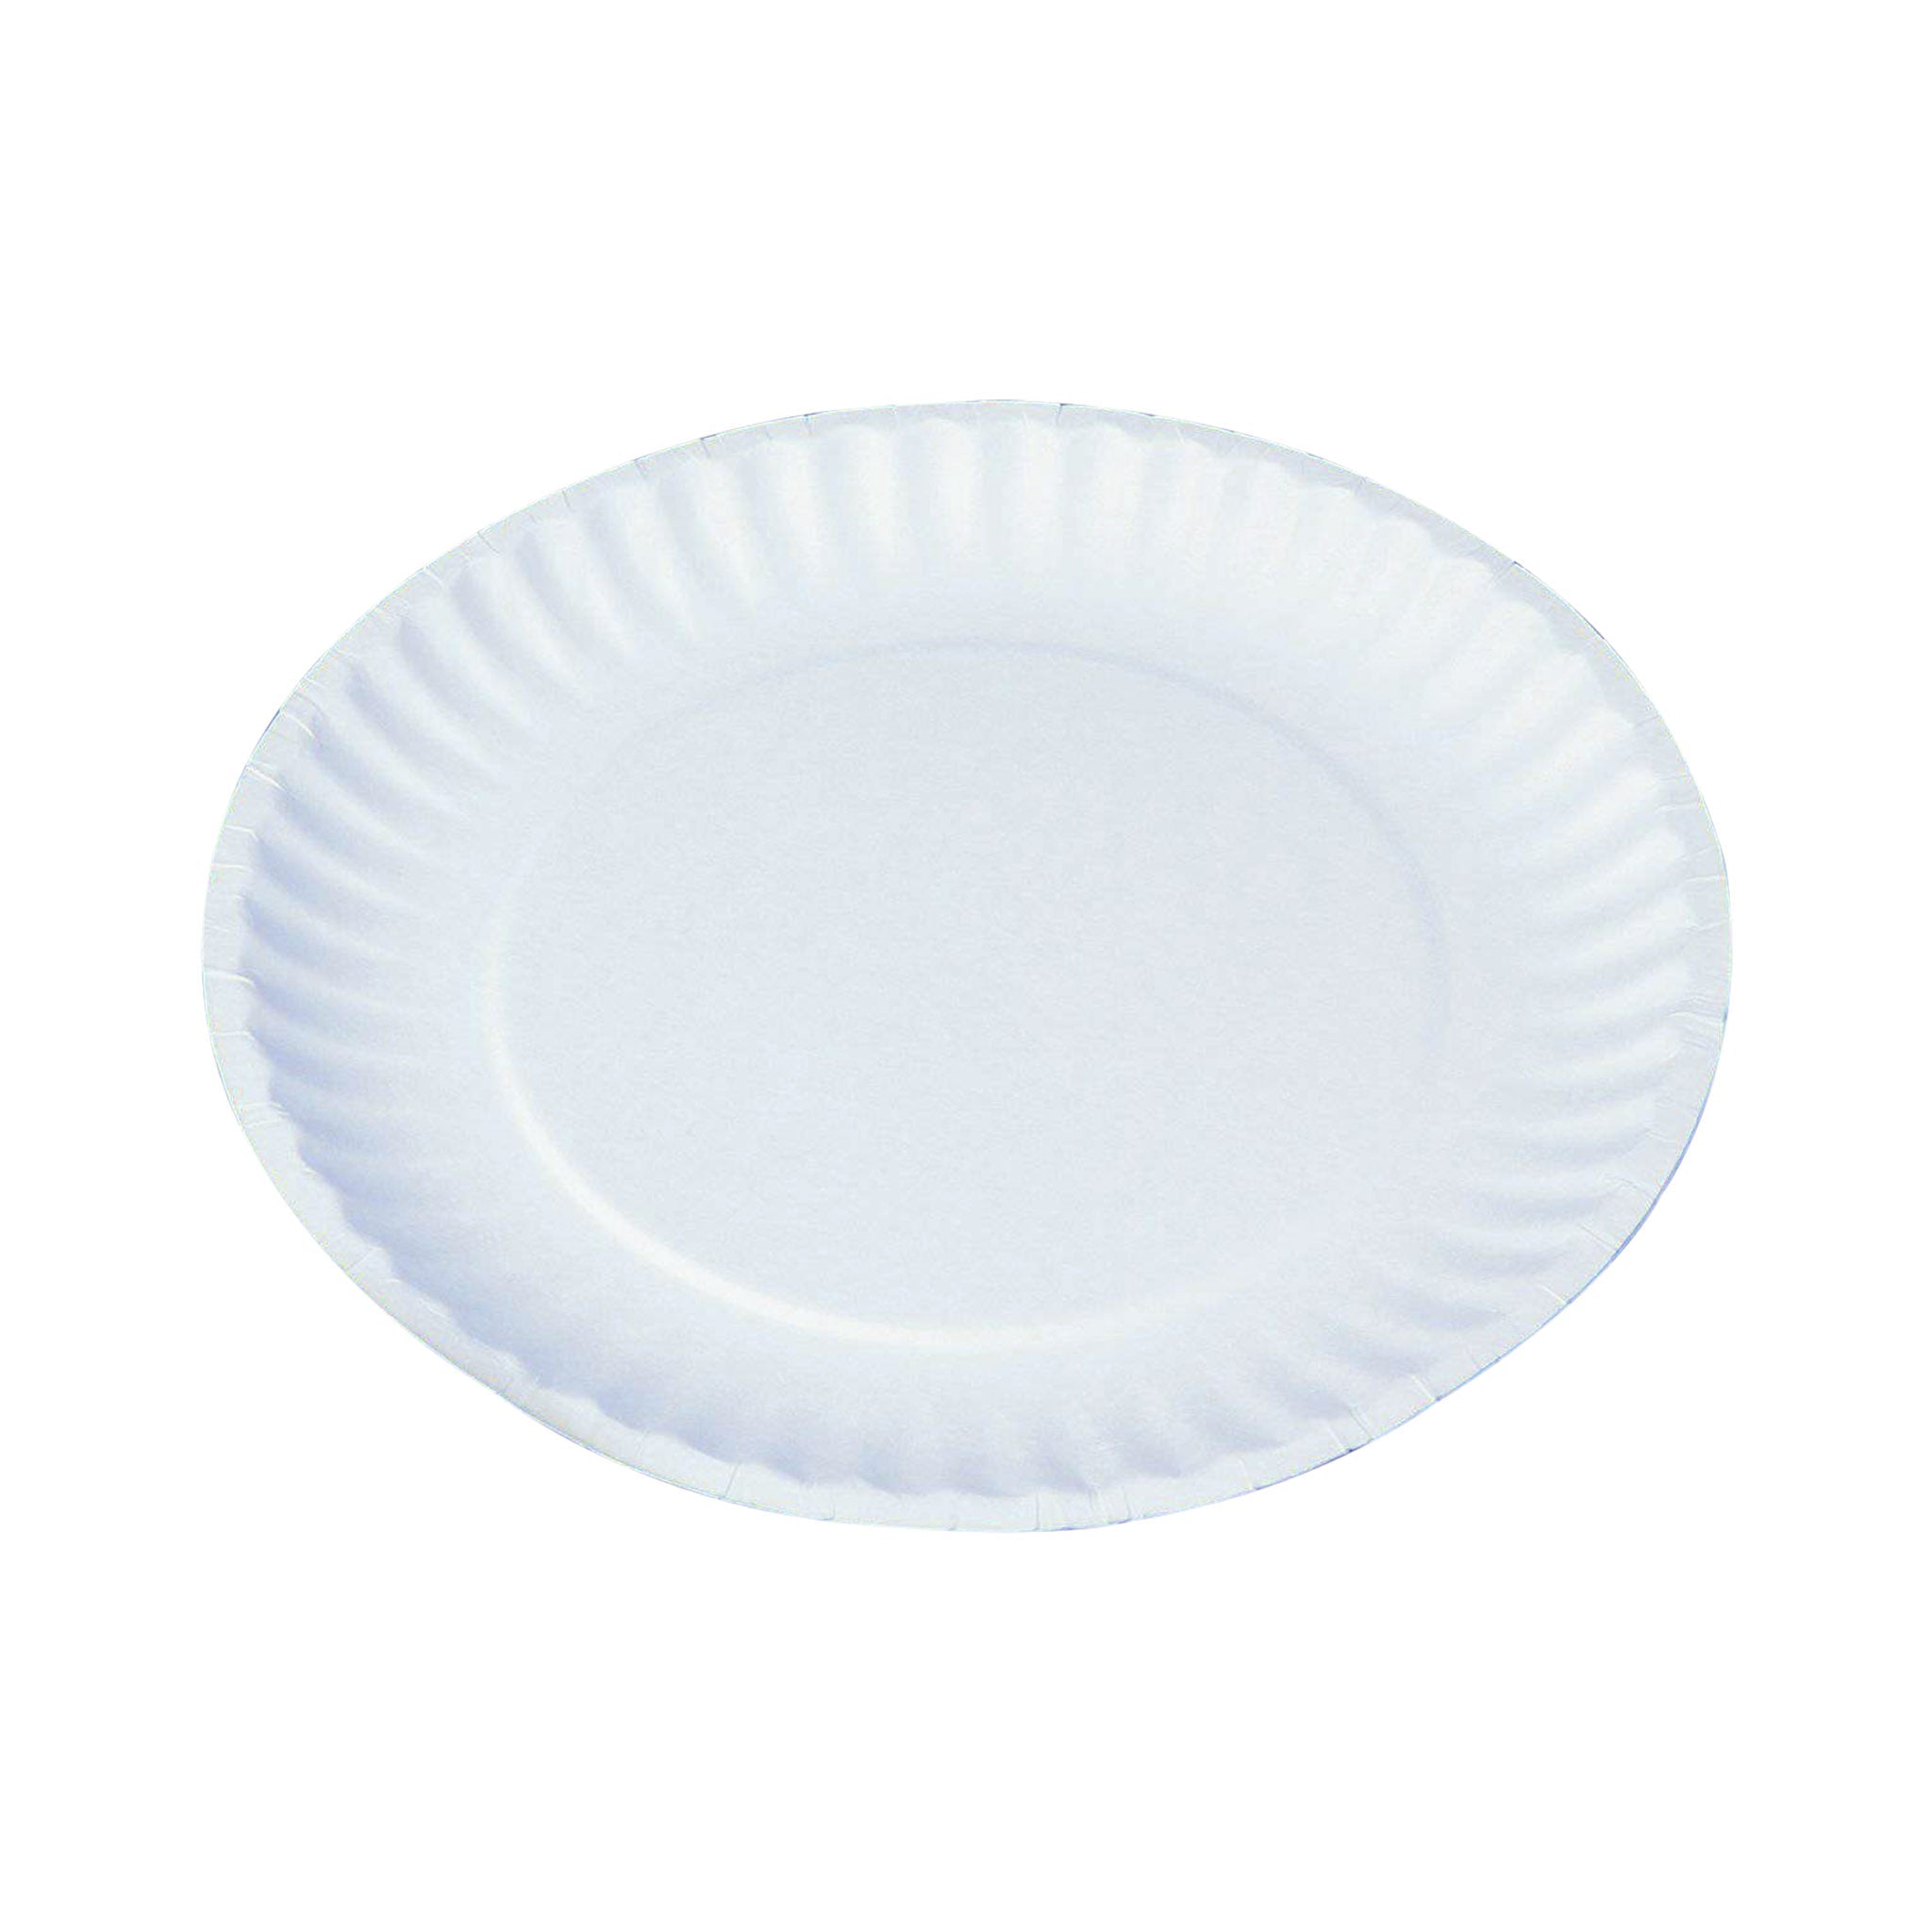 100 Pieces Paper Plate 9 Inch -12 Packets